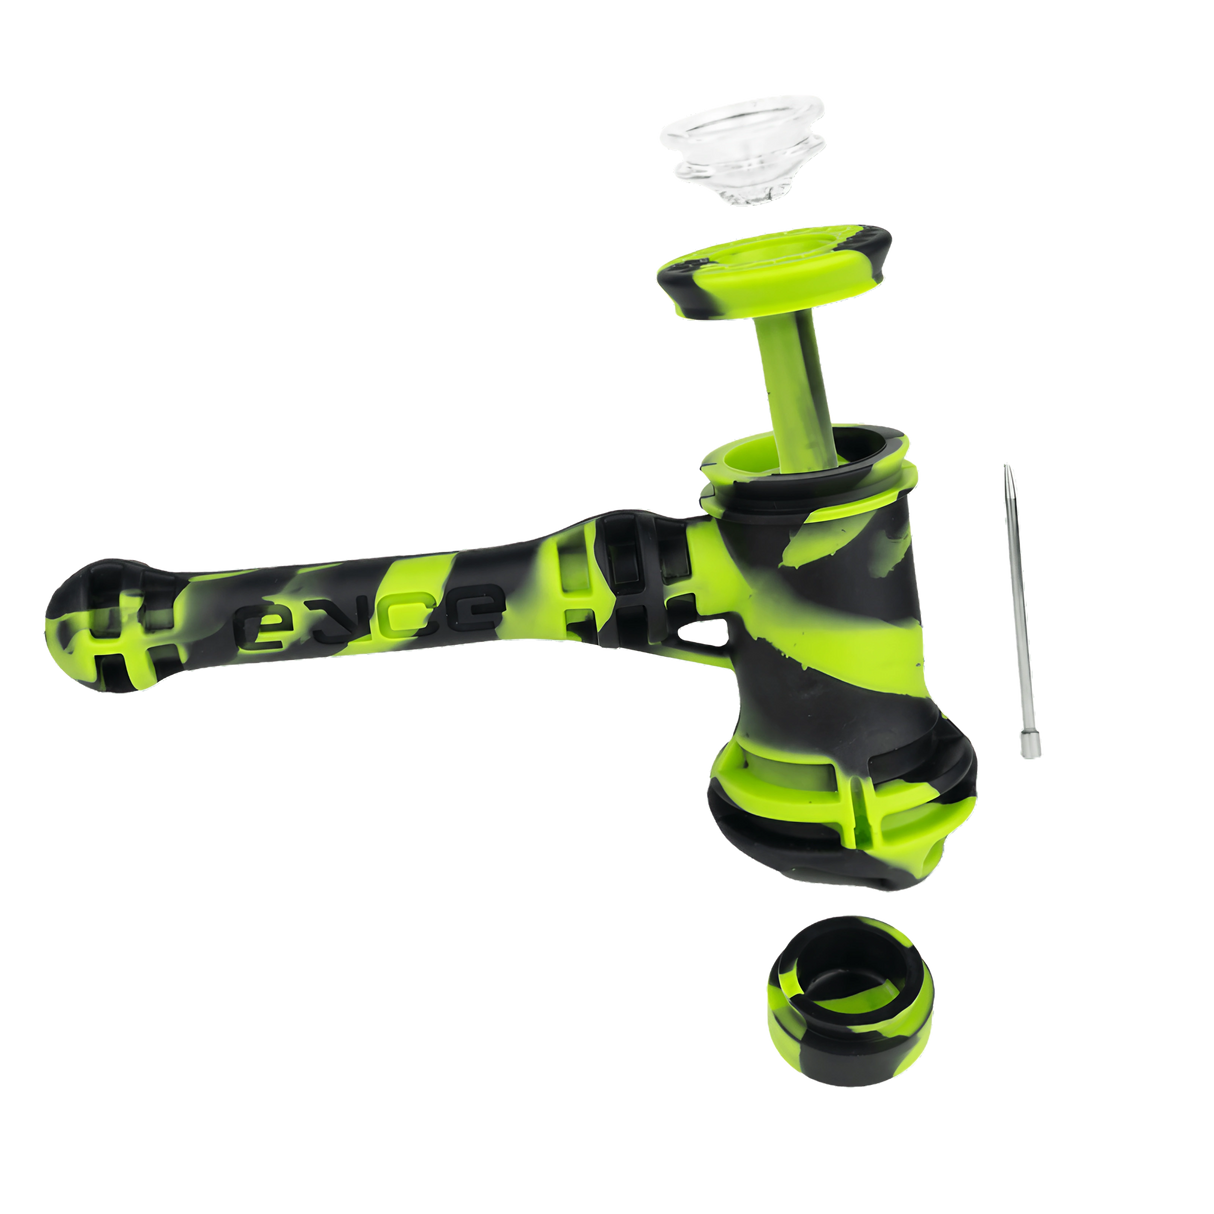 Eyce Hammer Silicone Bubbler in Green and Black, Portable Design with Steel Poker